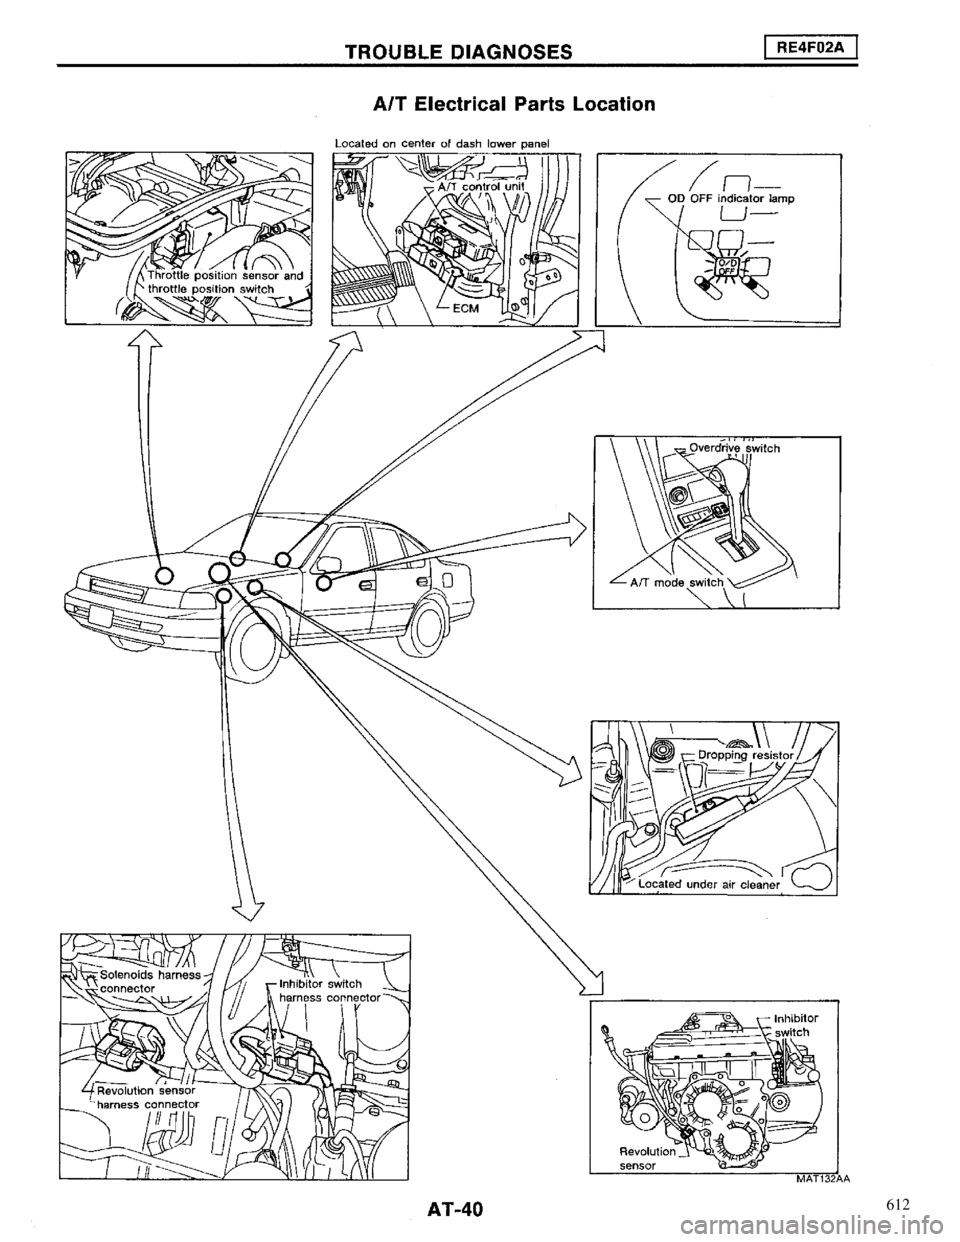 NISSAN MAXIMA 1994 A32 / 4.G Automatic Transaxle Owners Guide 612 